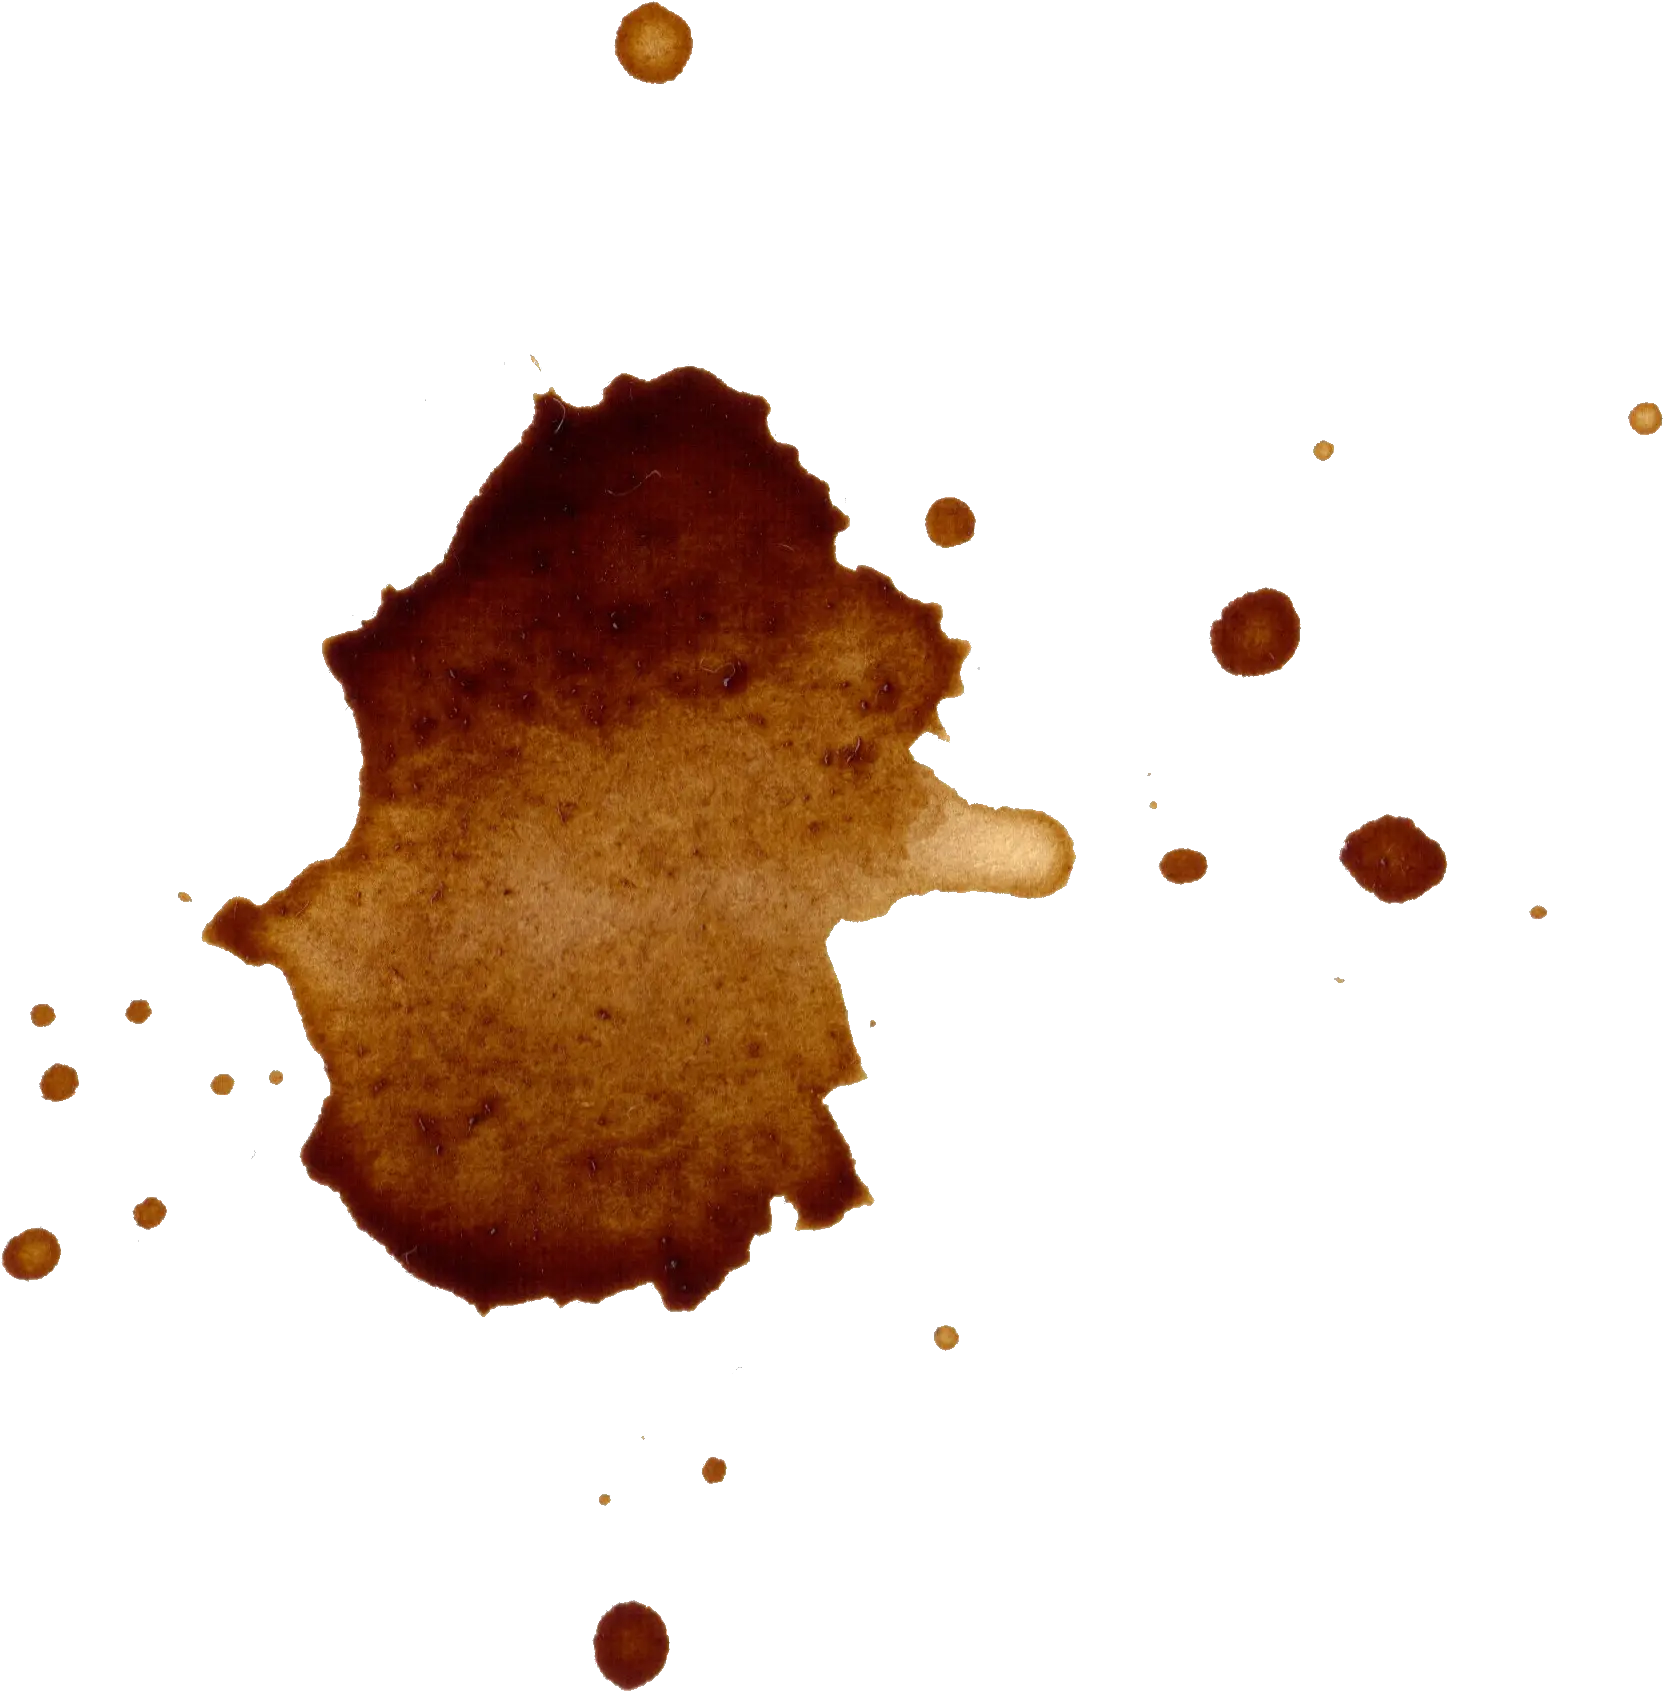 Coffee Stains Splatter Transparent Transparent Coffee Splatter Png Stain Png